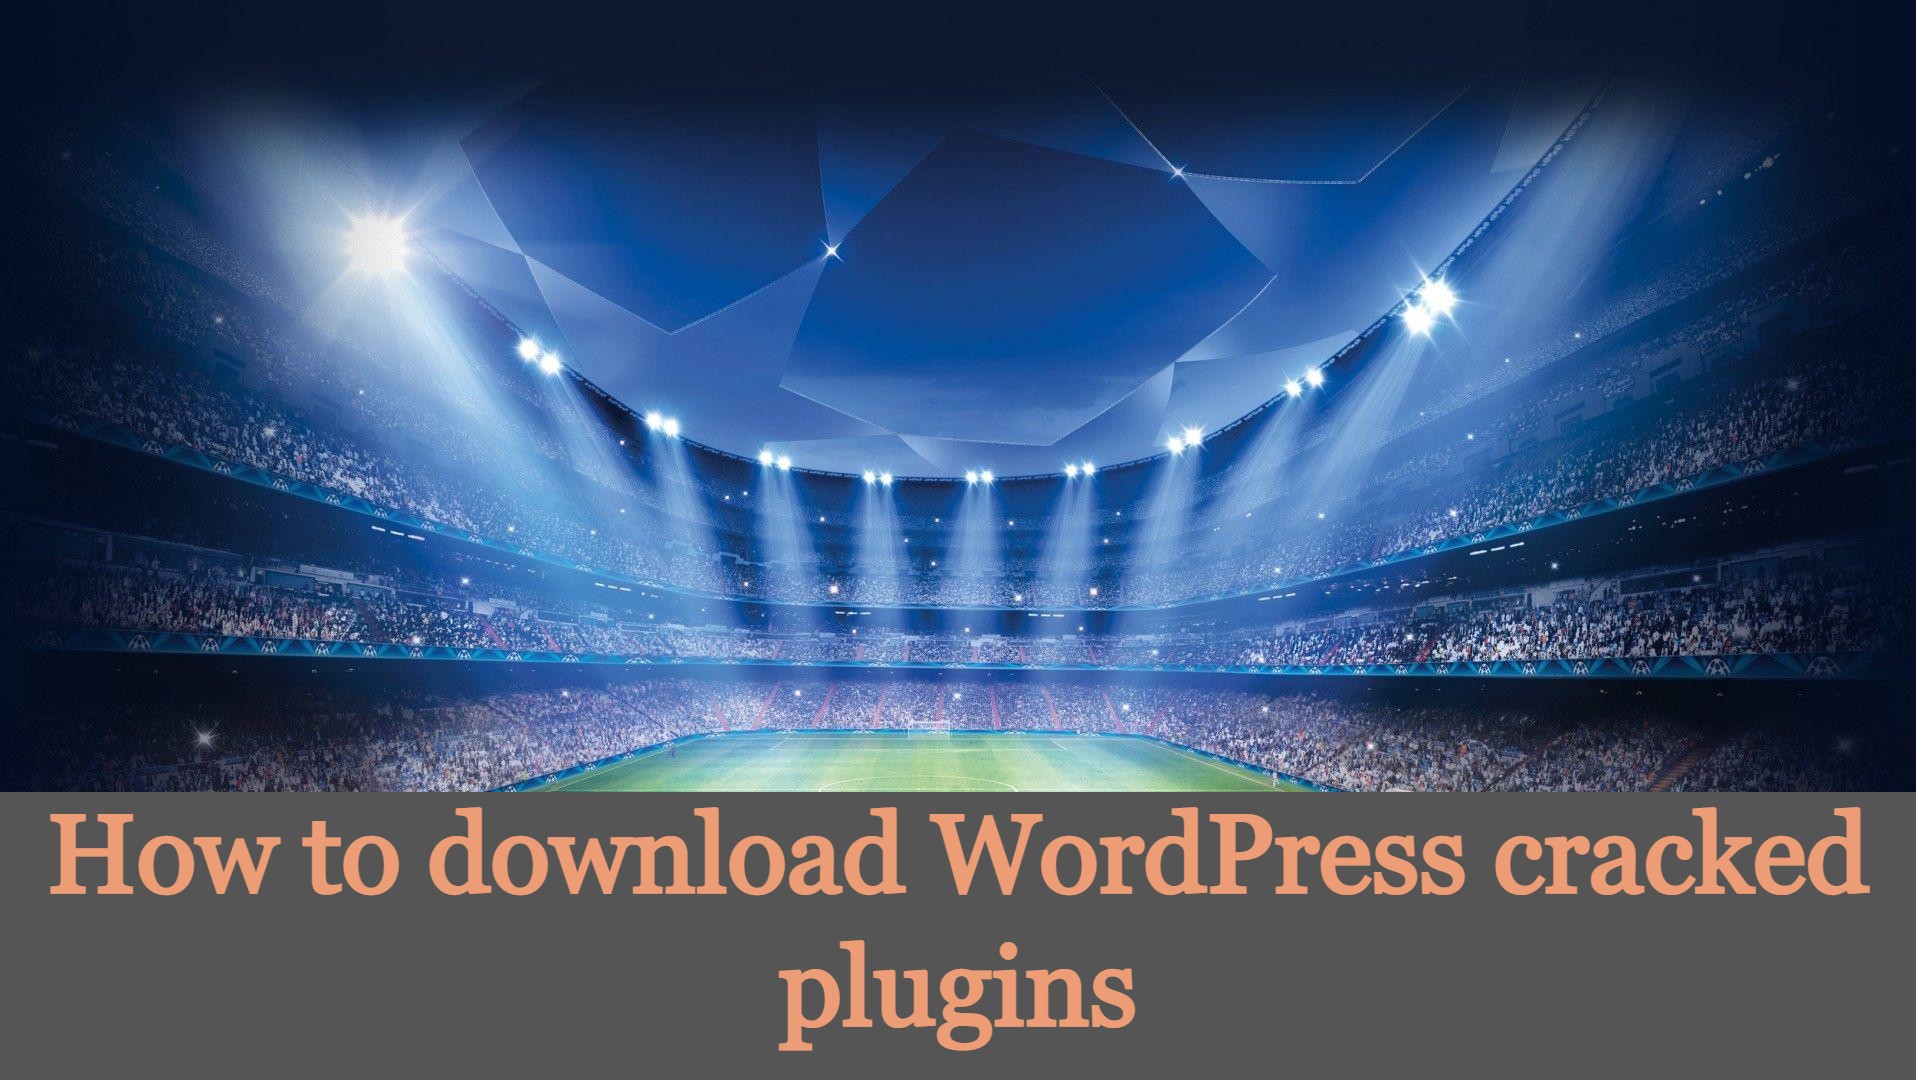 You are currently viewing How to download WordPress cracked plugins – Nulled version of WordPress Plugin